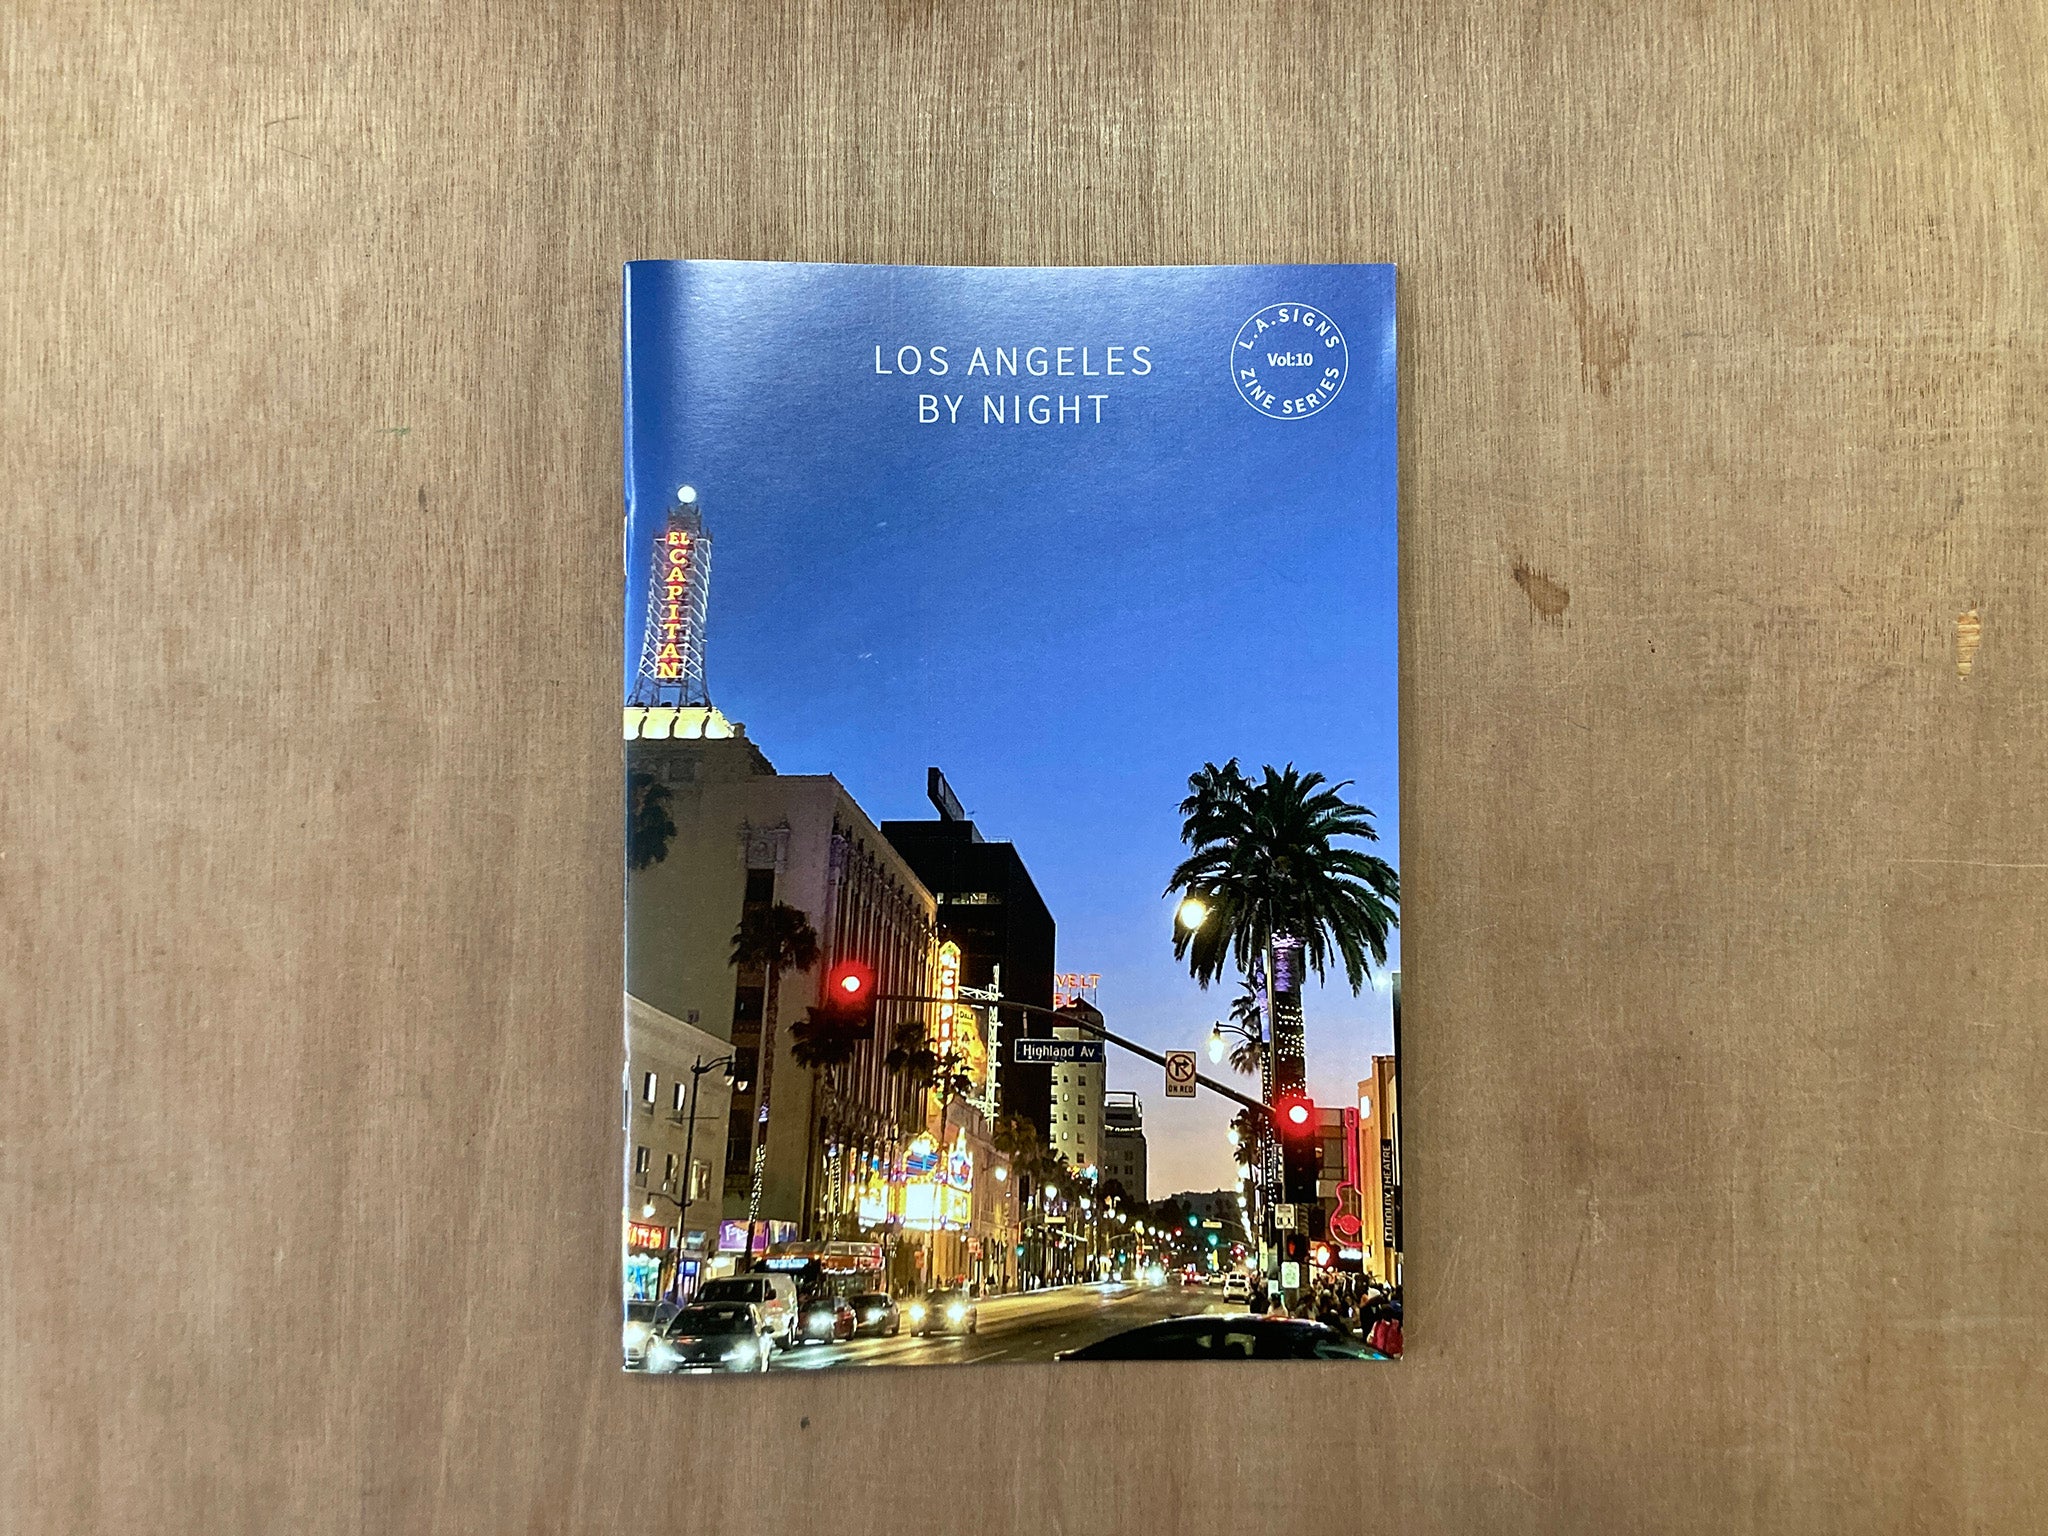 L.A. SIGNS ZINE SERIES: LOS ANGELES BY NIGHT by Paul Price